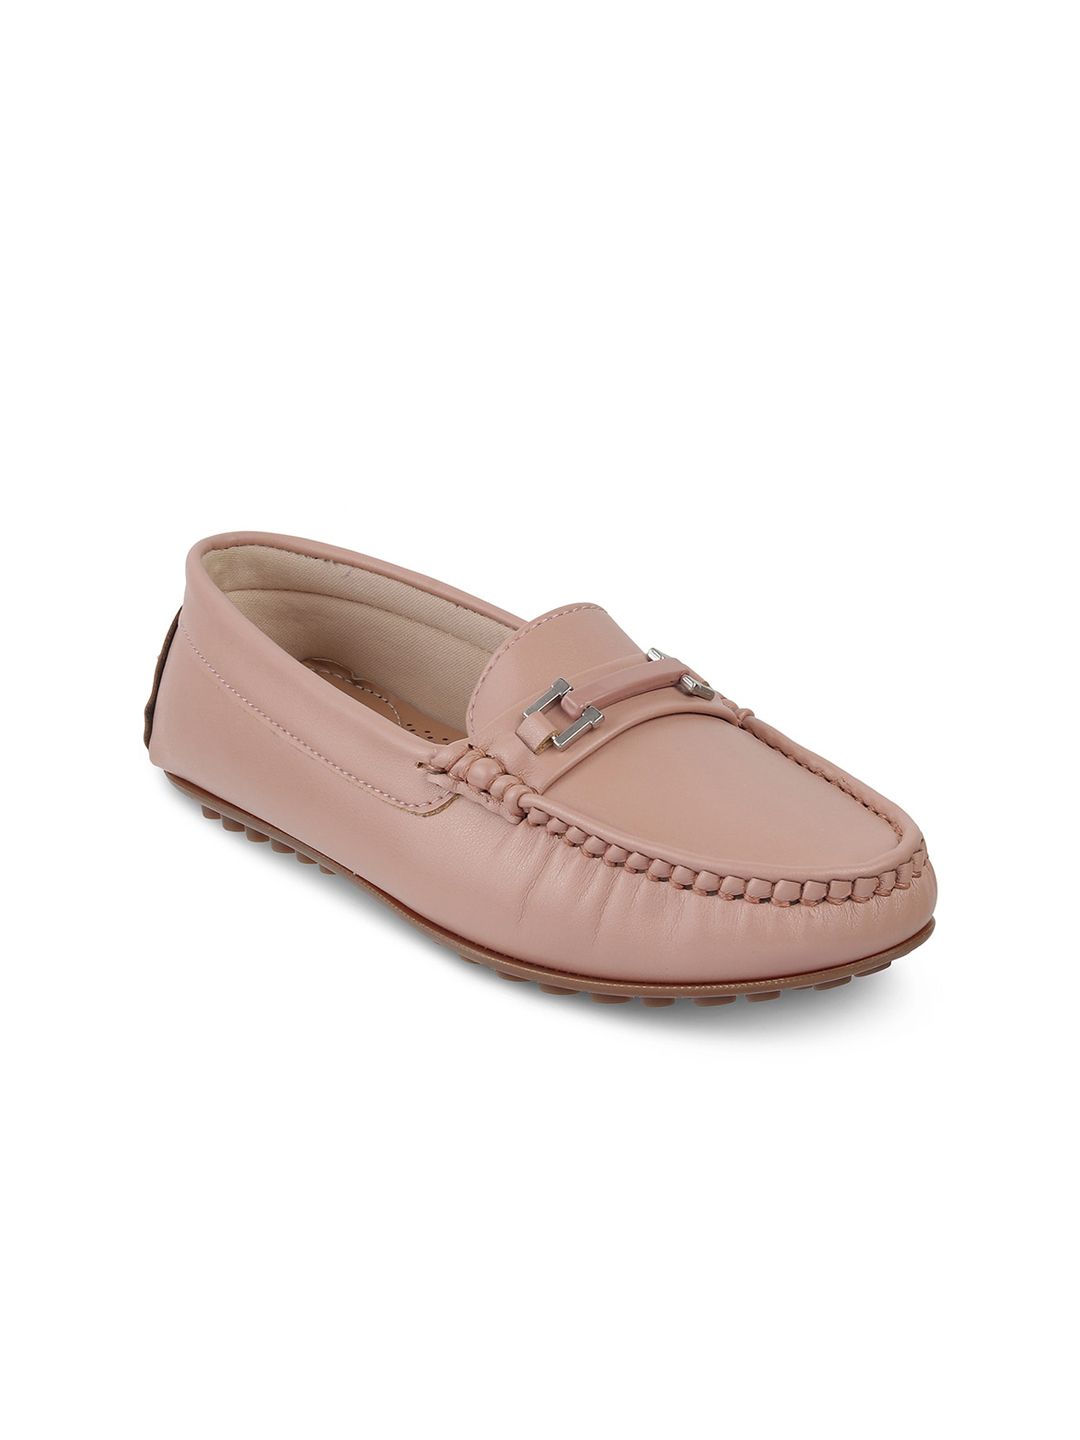 PEPPER Women Buckle Detail Loafers Price in India